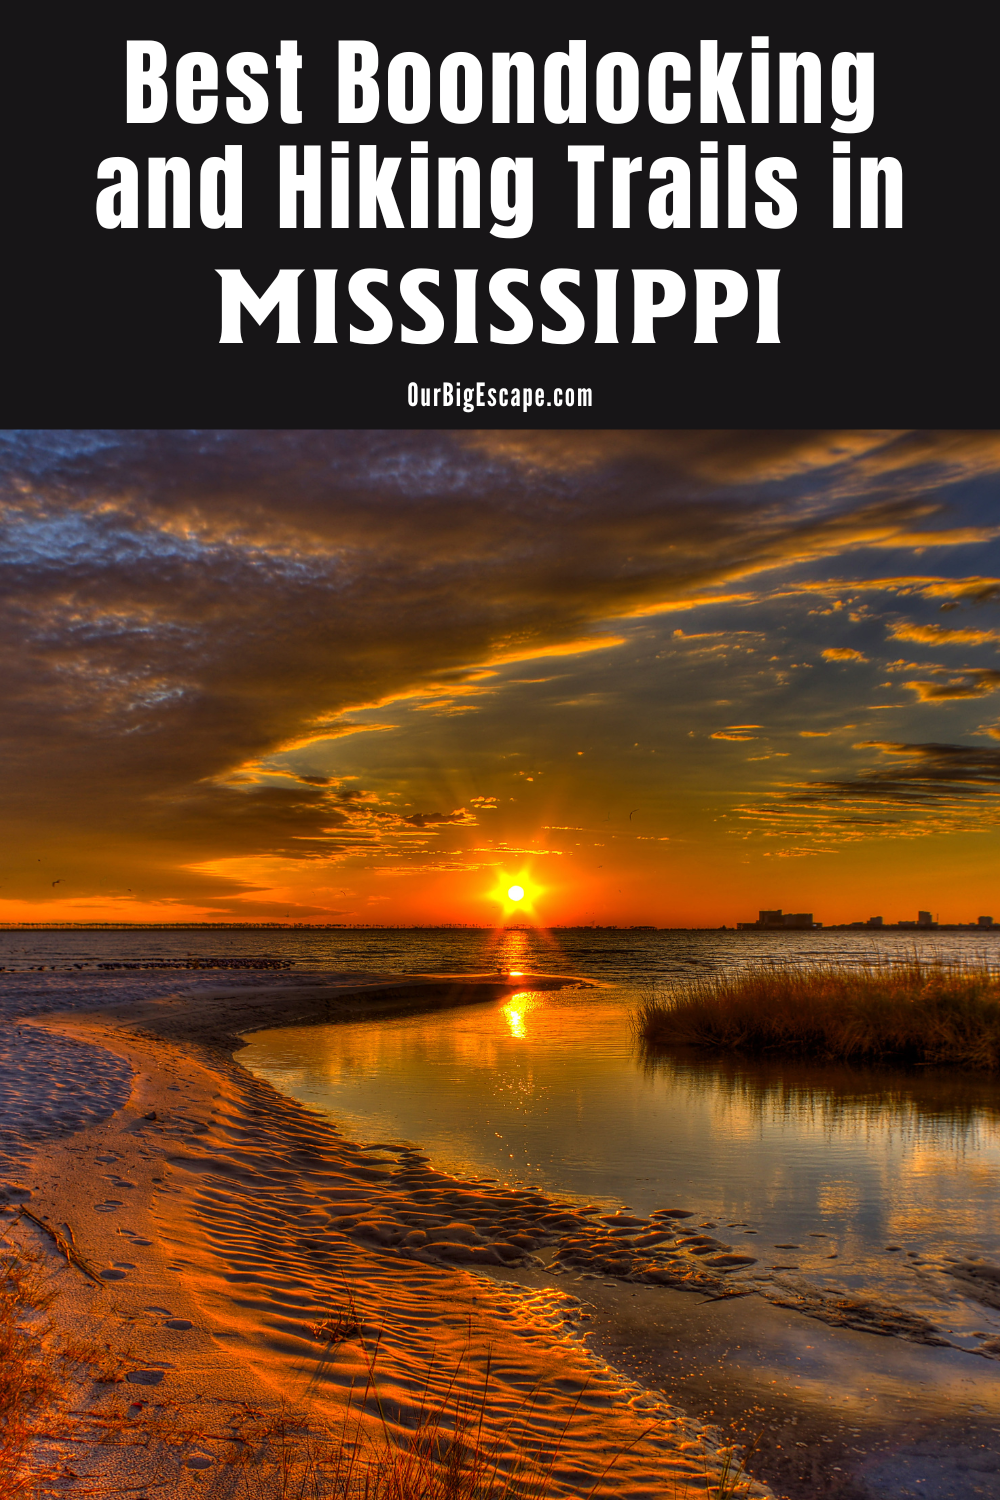 Best Boondocking and Hiking Trails in Mississippi